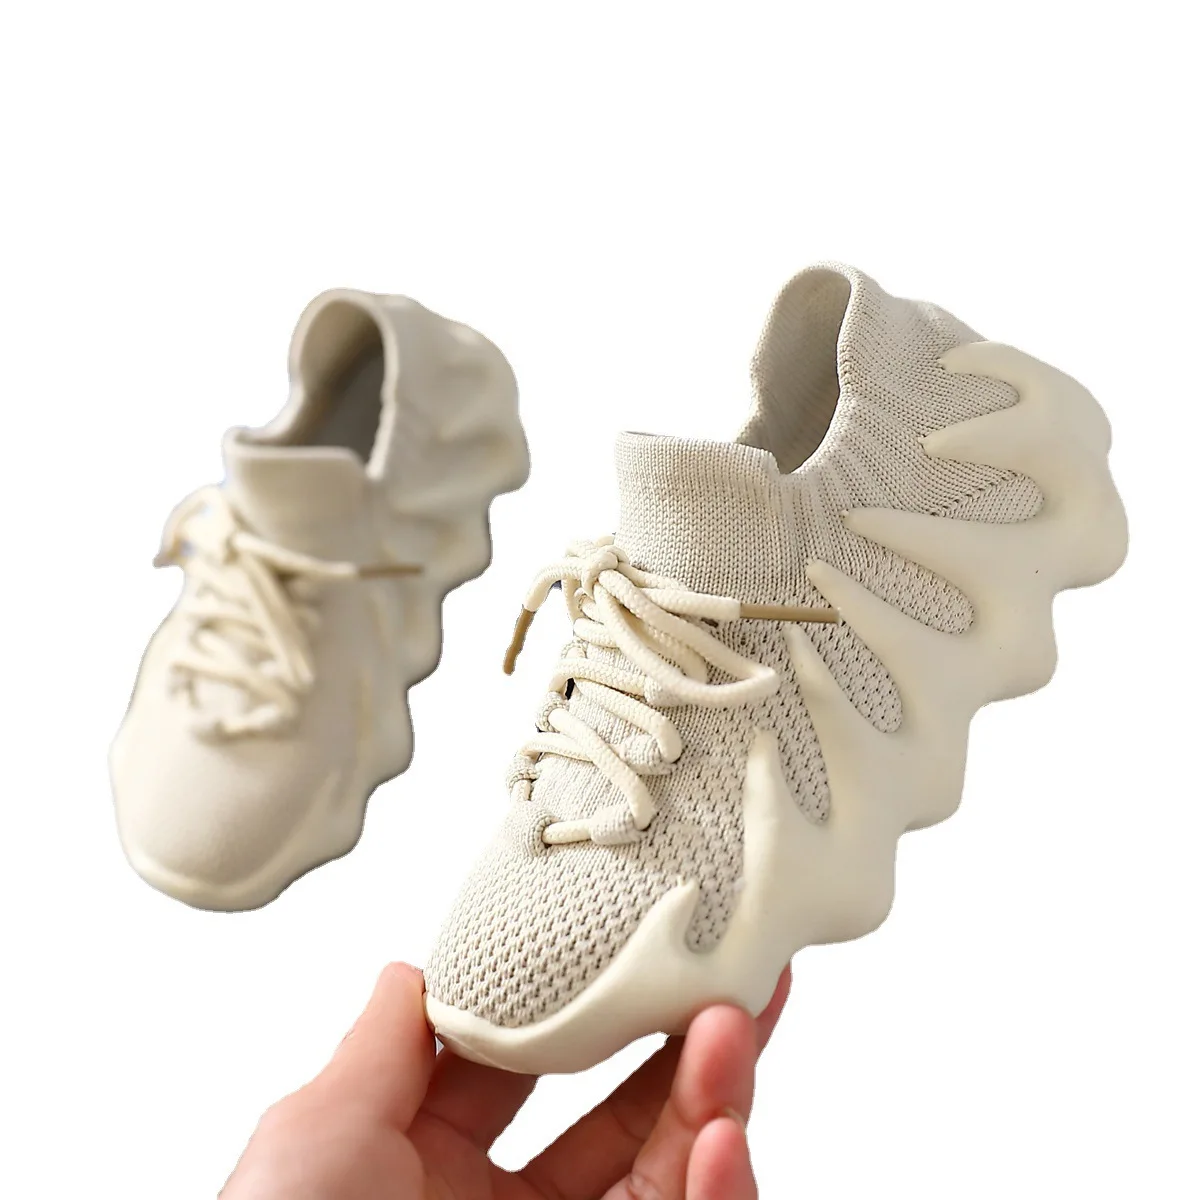 

2021 Fashion Boys Girls Casual Sneakers Toddler Kid Yeezy 450 Children Lace-Up Walking Shoes, Picture shows